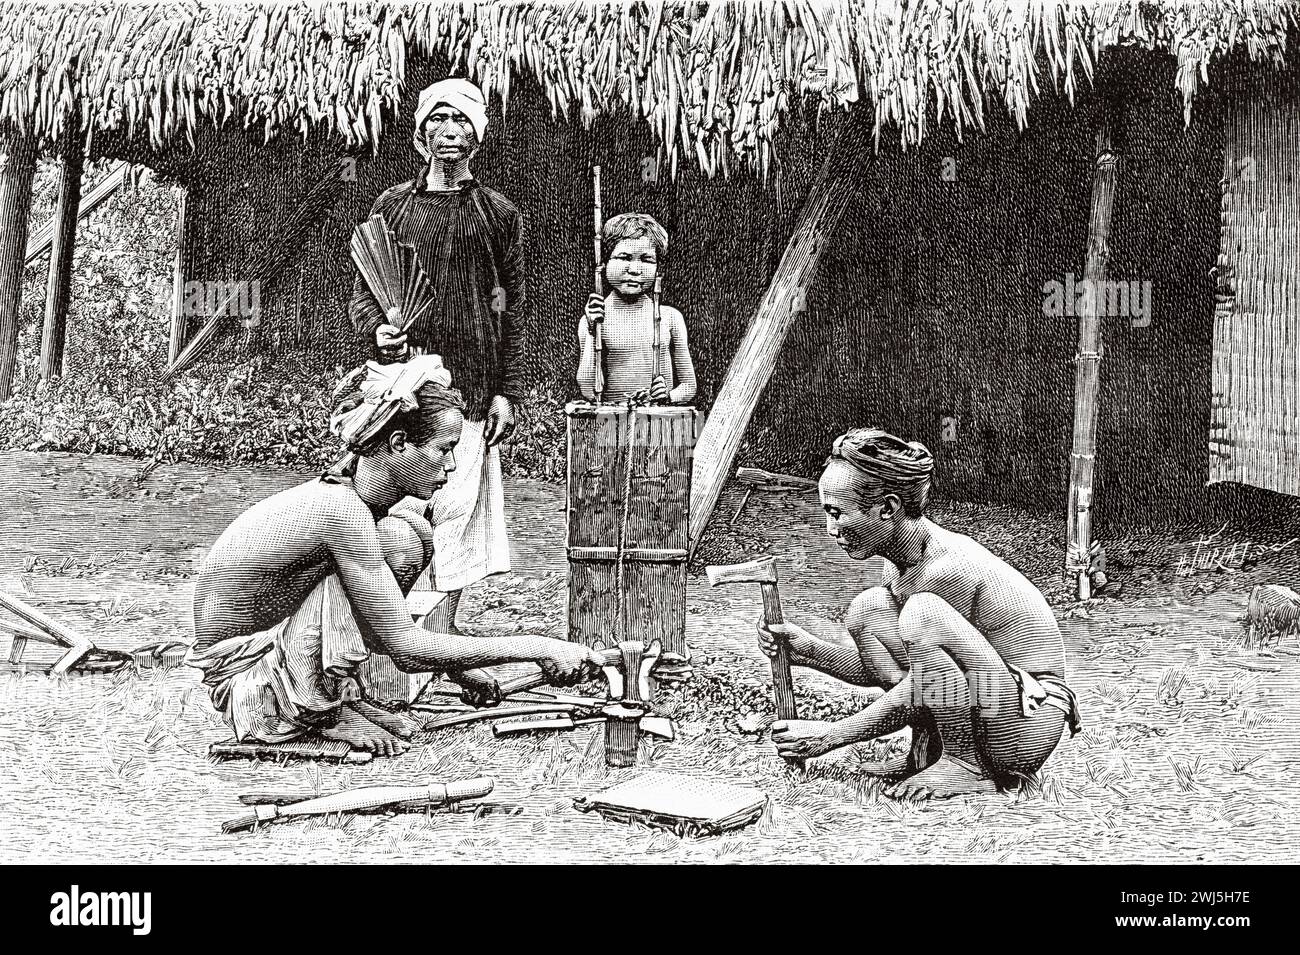 An Annamite forge. Tonkin, French Indochina. Vietnam, Asia. Thirty months in Tonkin 1885 by Doctor Charles Edouard Hocquard (1853 - 1911) Le Tour du Monde 1890 Stock Photo